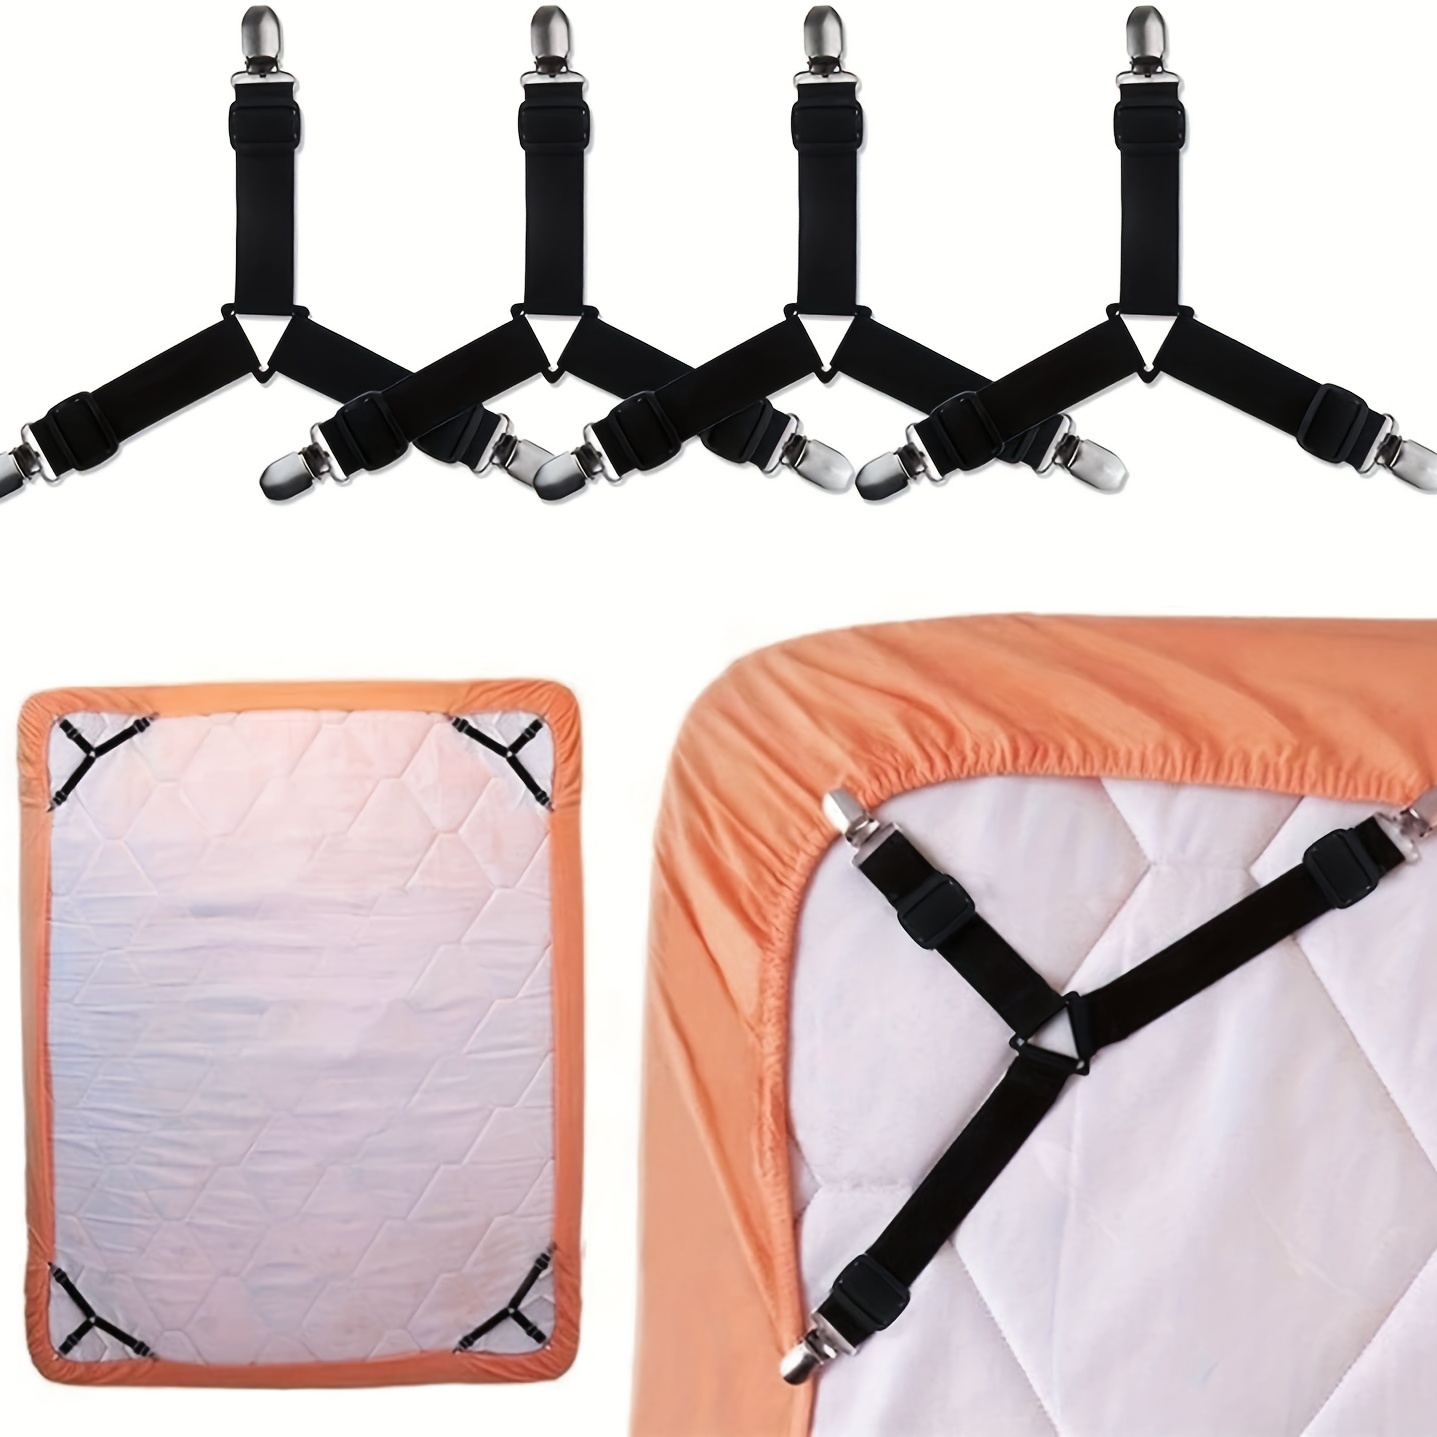 1pc Bed Sheet Fasteners, Adjustable Elastic Sheet Straps Bed Sheet Grippers  Suspenders For Mattresses Fitted Sheets Flat Sheets